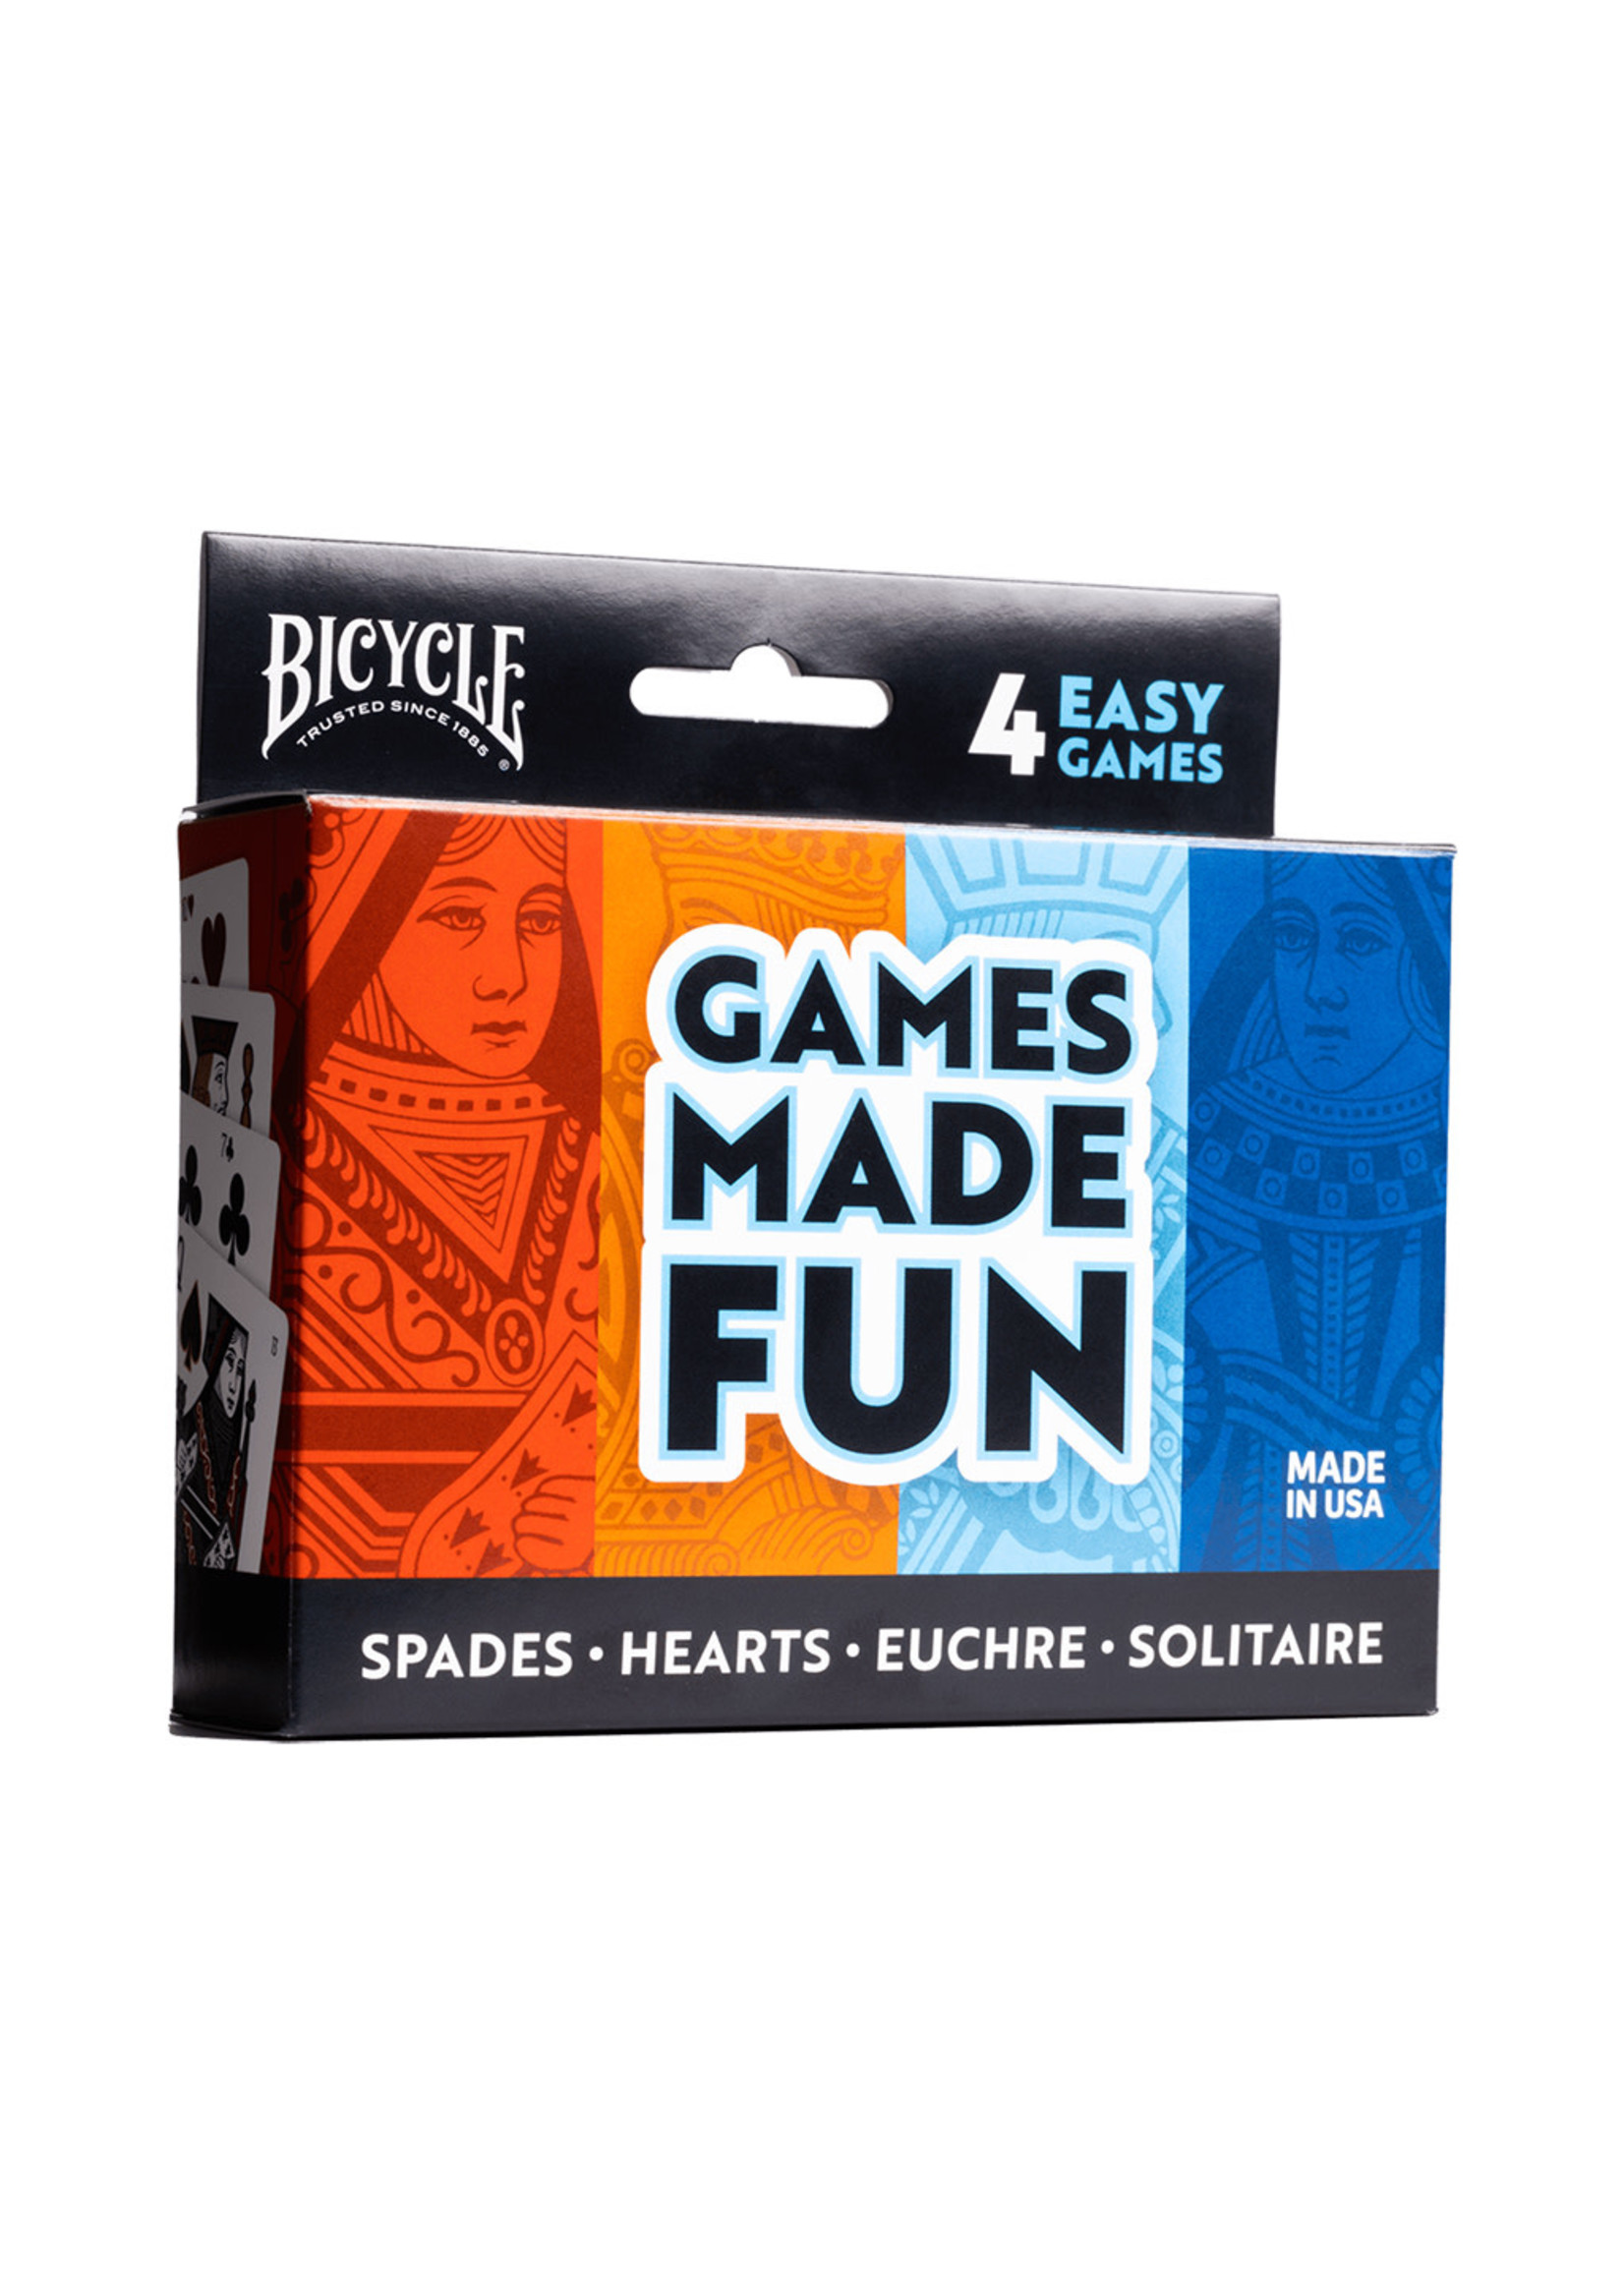 Bicycle Bicycle 4-Game Pack (Hearts Spades Euchre and Solitaire)